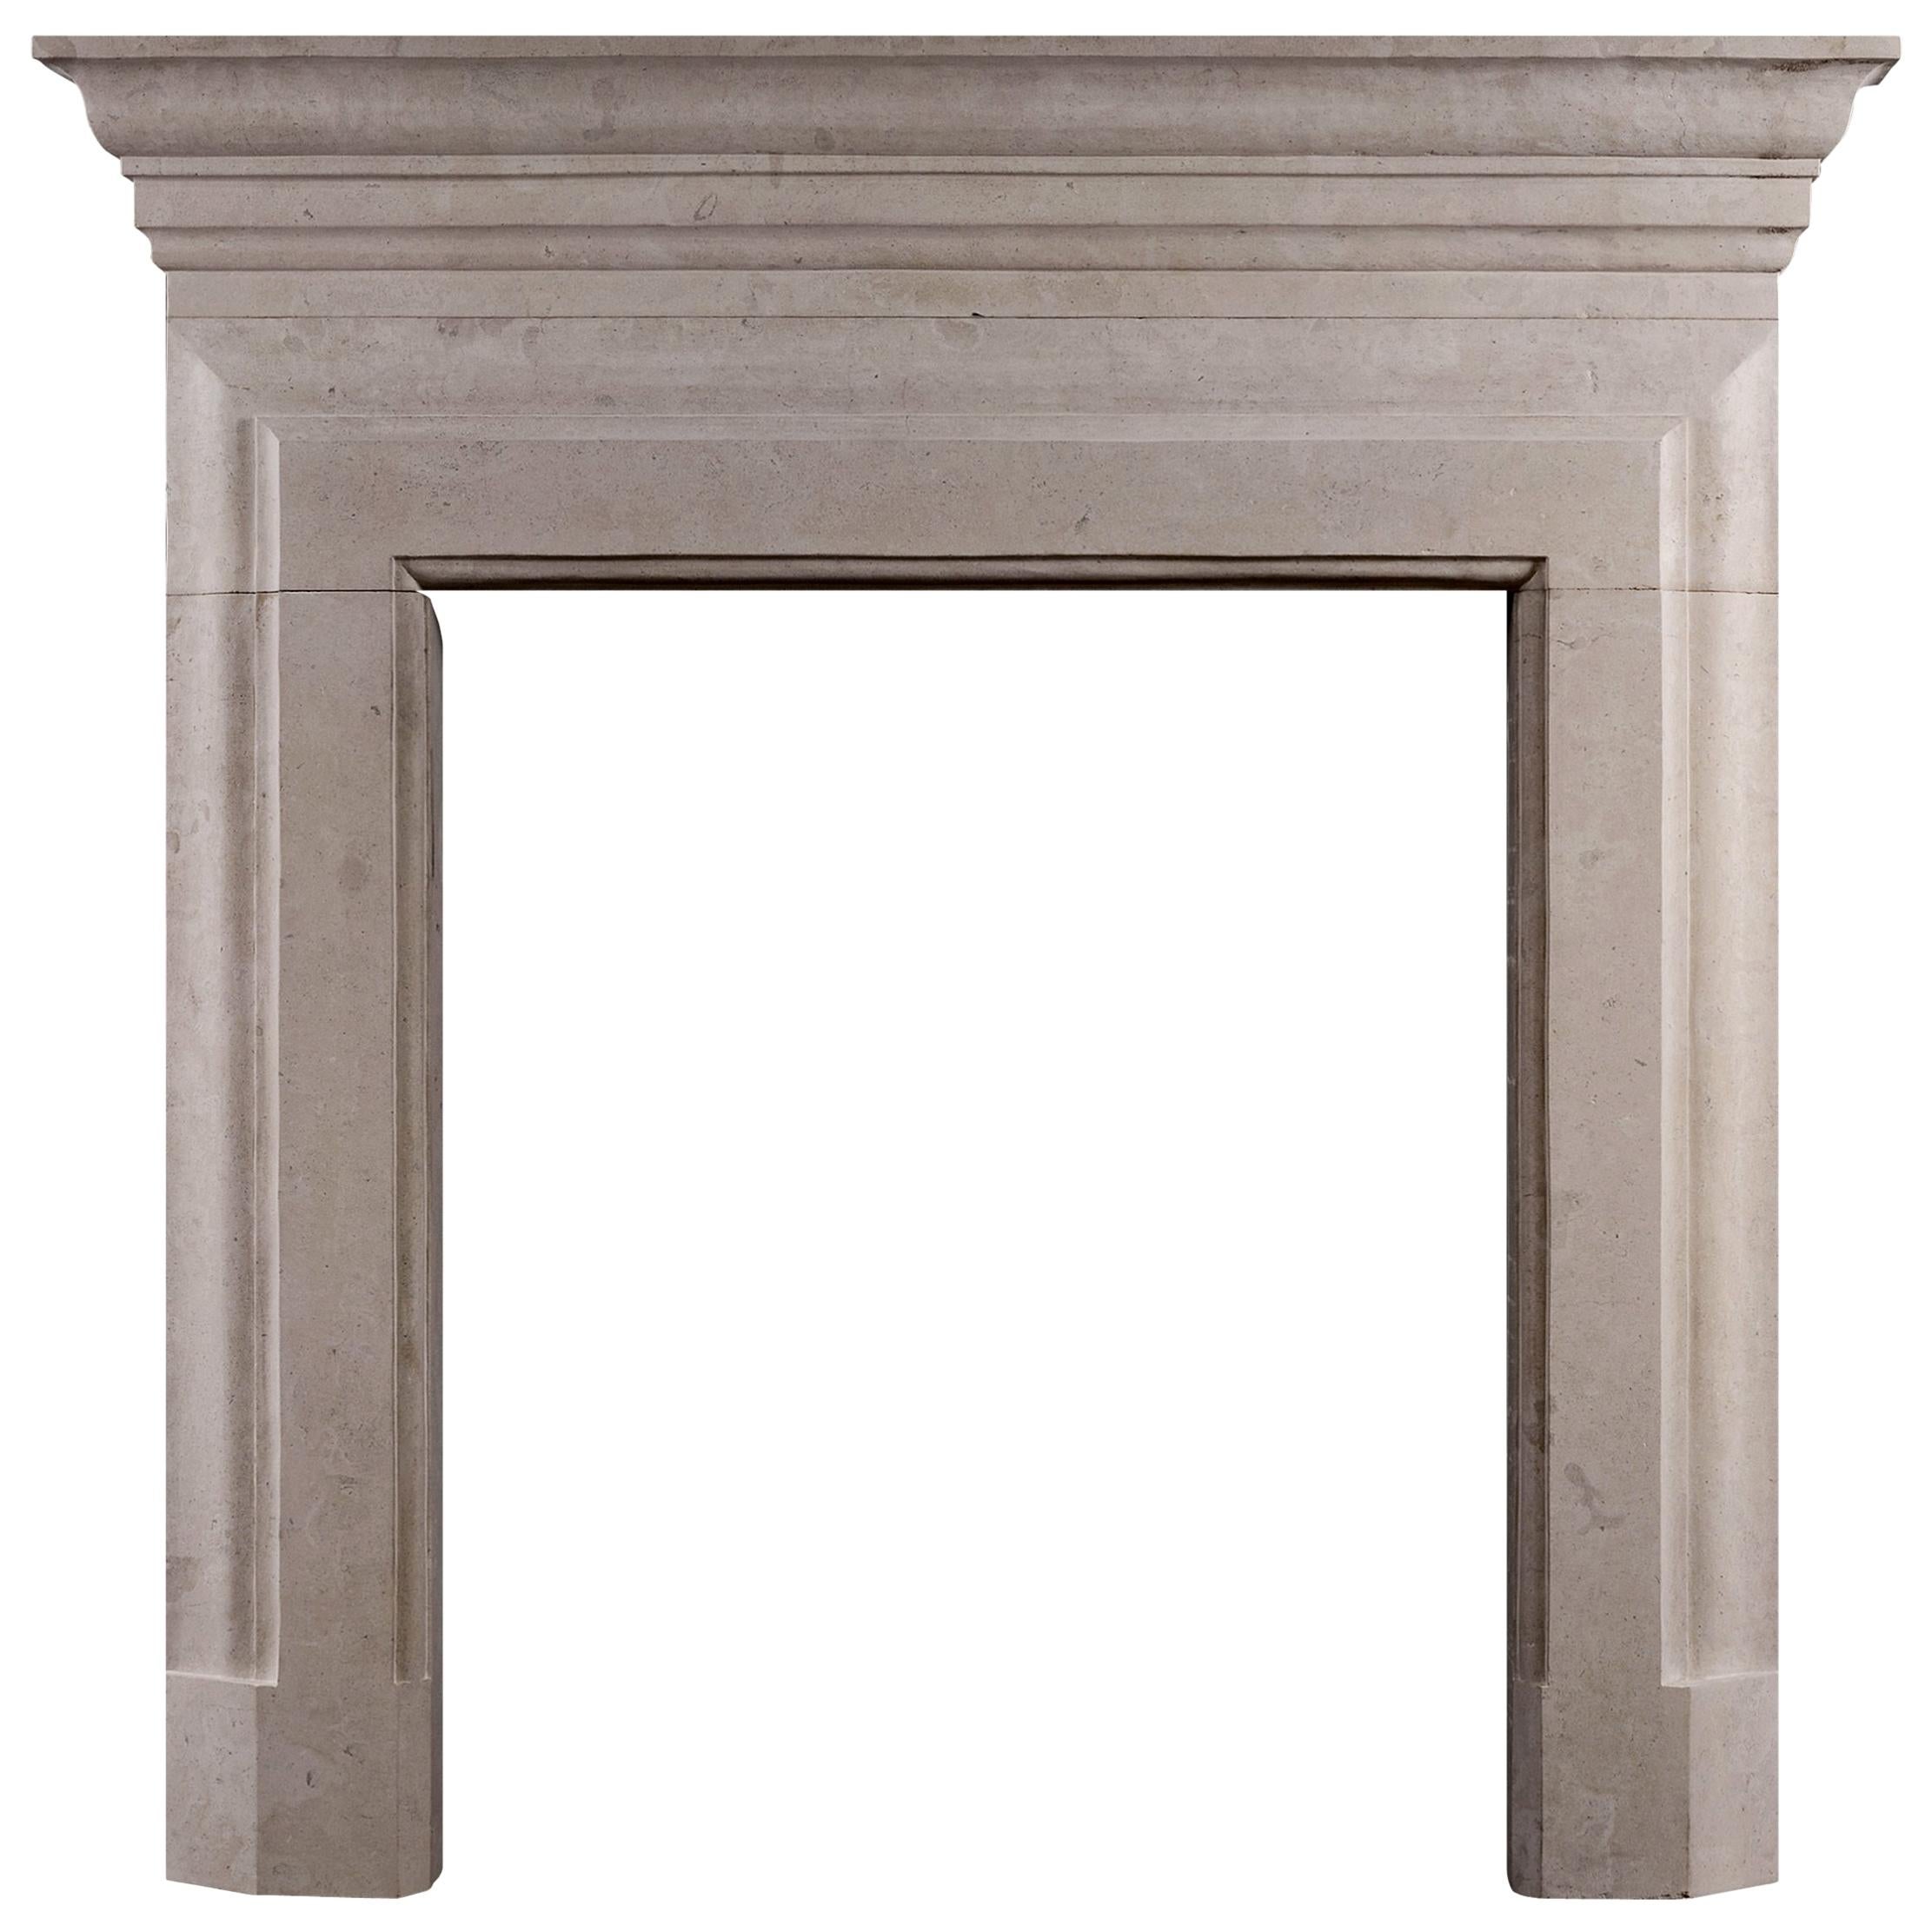 English Limestone Fireplace of Architectural Form